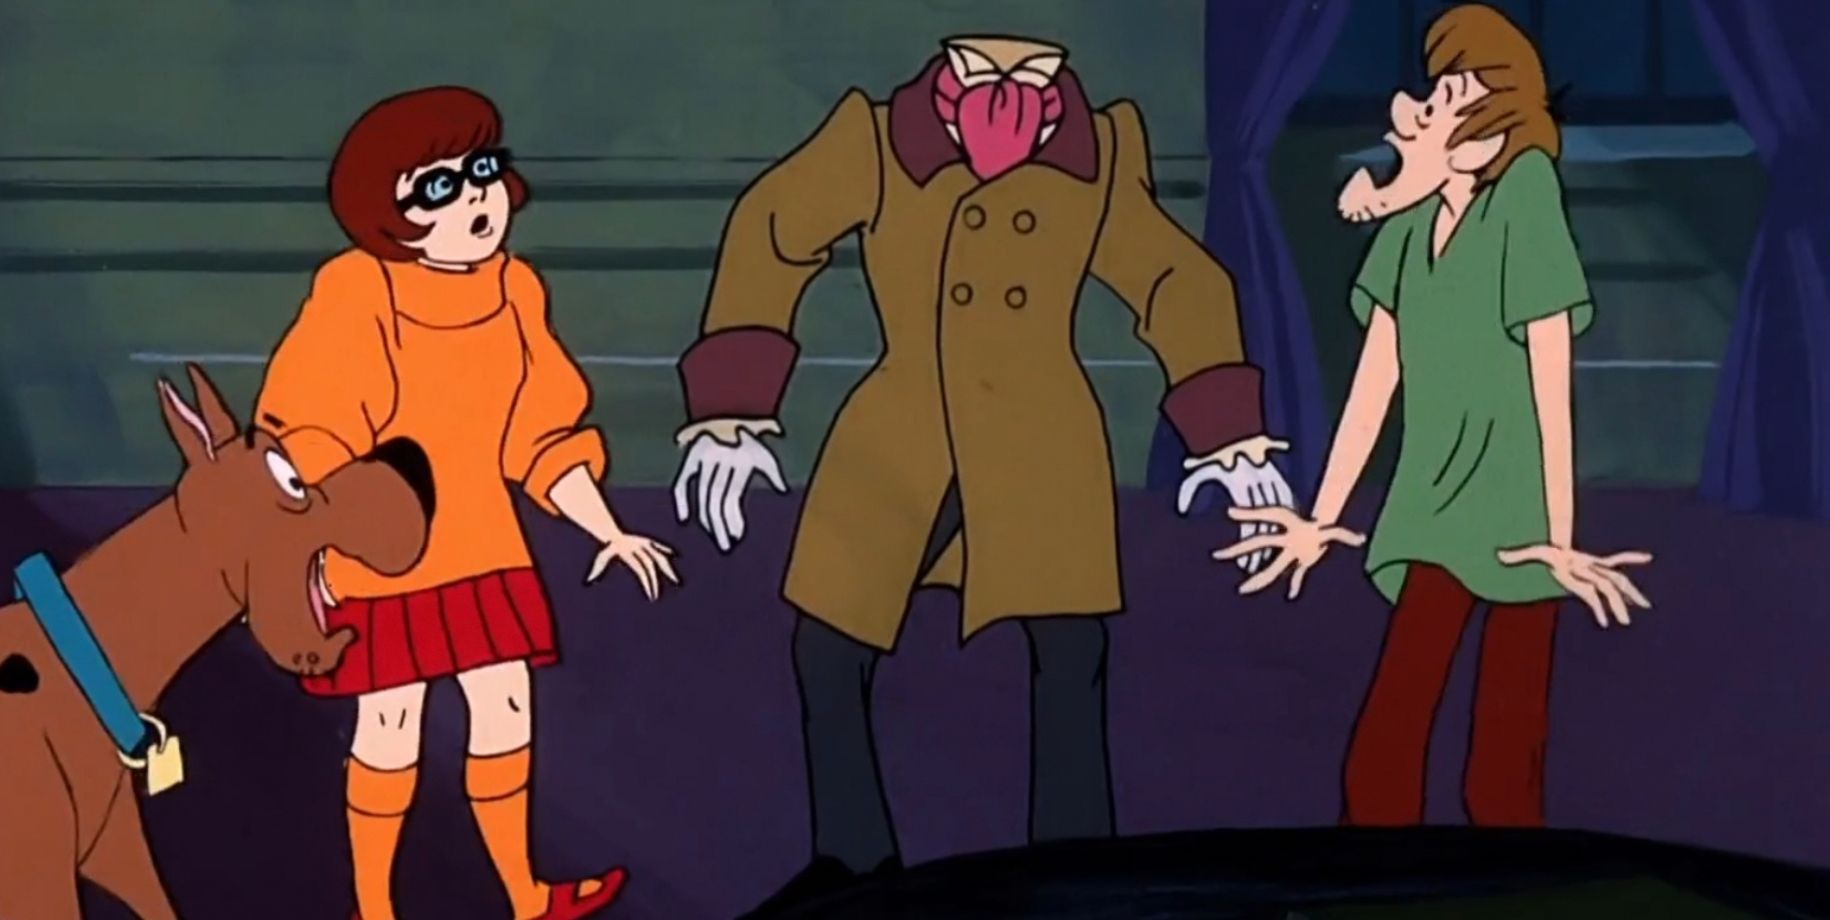 Scooby, Velma, and Shaggy scared by a headless ghost in a Scooby-Doo episode Haunted House Hang-up